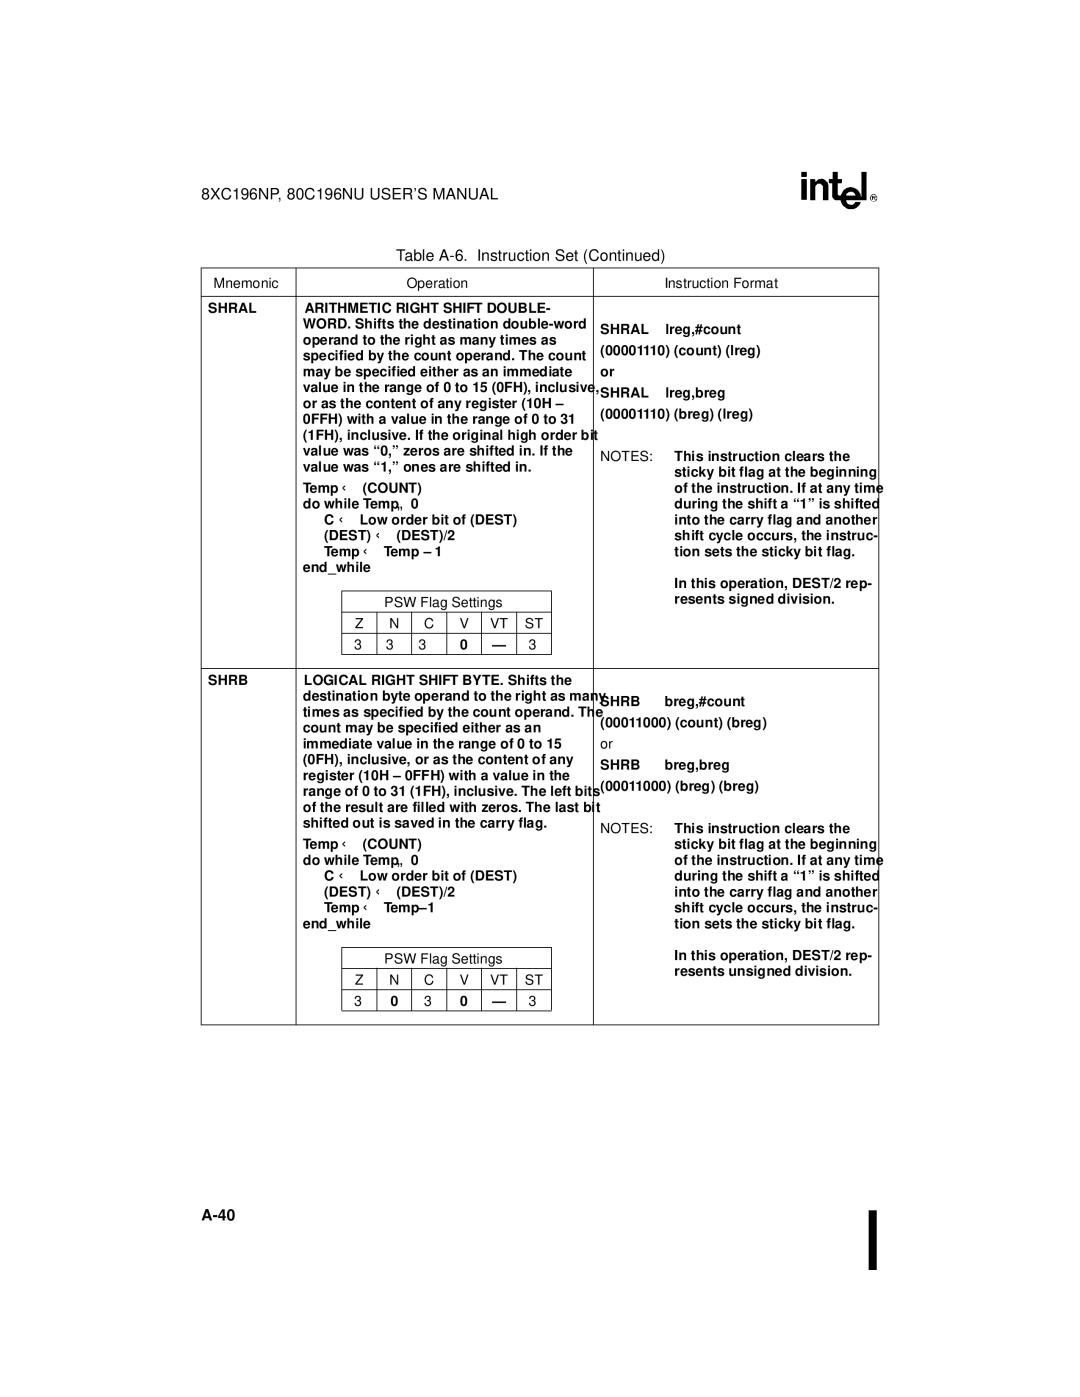 Intel 80C196NU, 8XC196NP, Microcontroller manual Shral Arithmetic Right Shift Double 